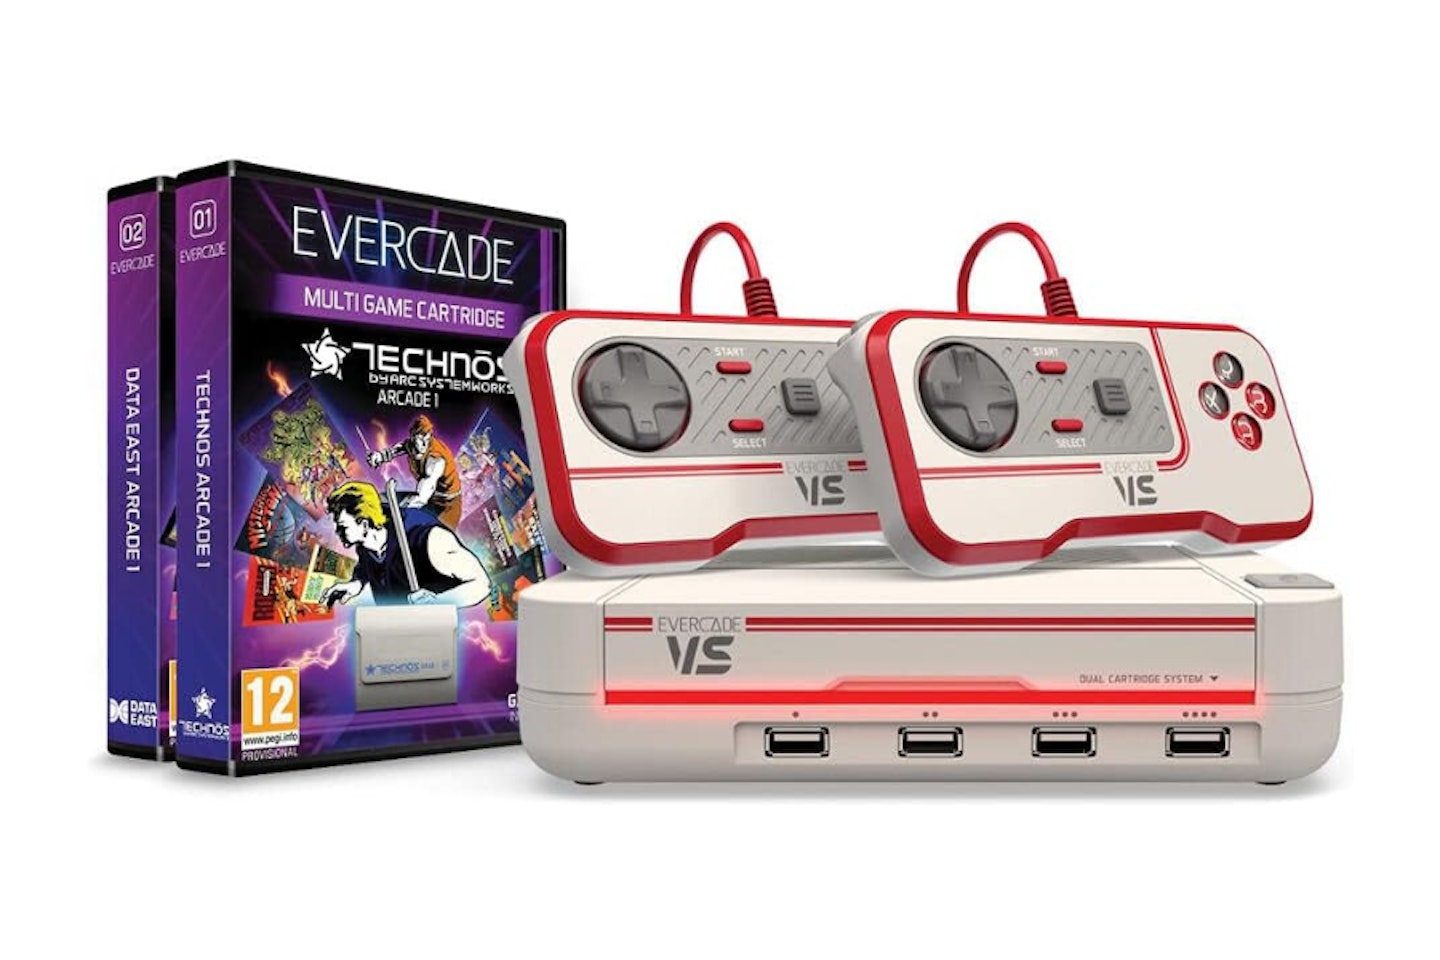 Evercade VS Retro Premium Pack - one of the best gifts for gamers